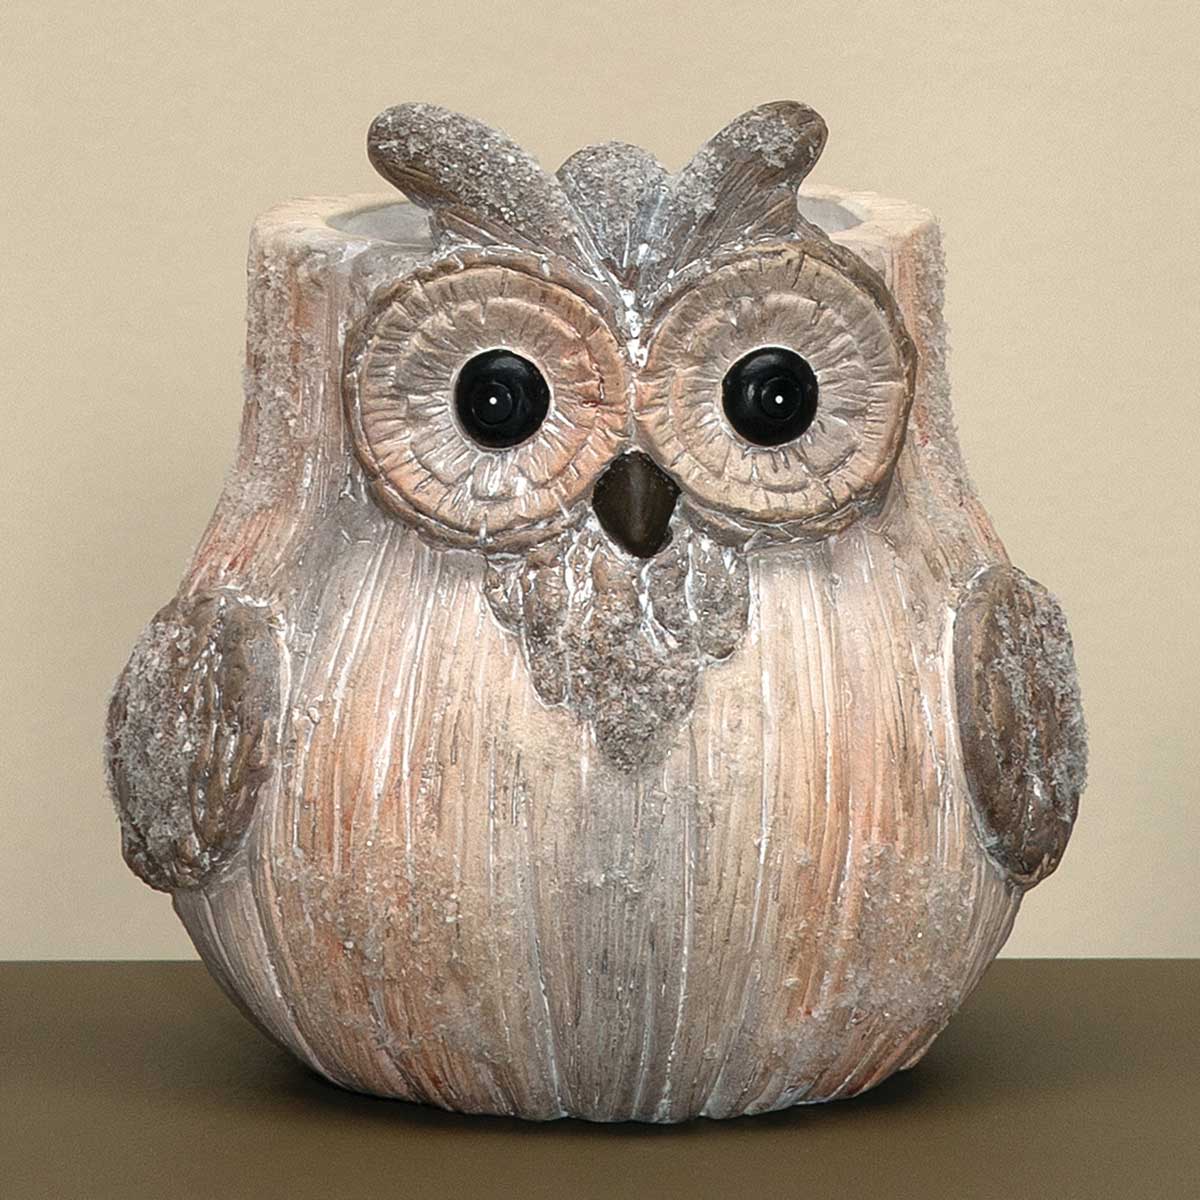 OLLIE FROSTED CERAMIC OWL POT CREAM/BROWN WITH MICA LG